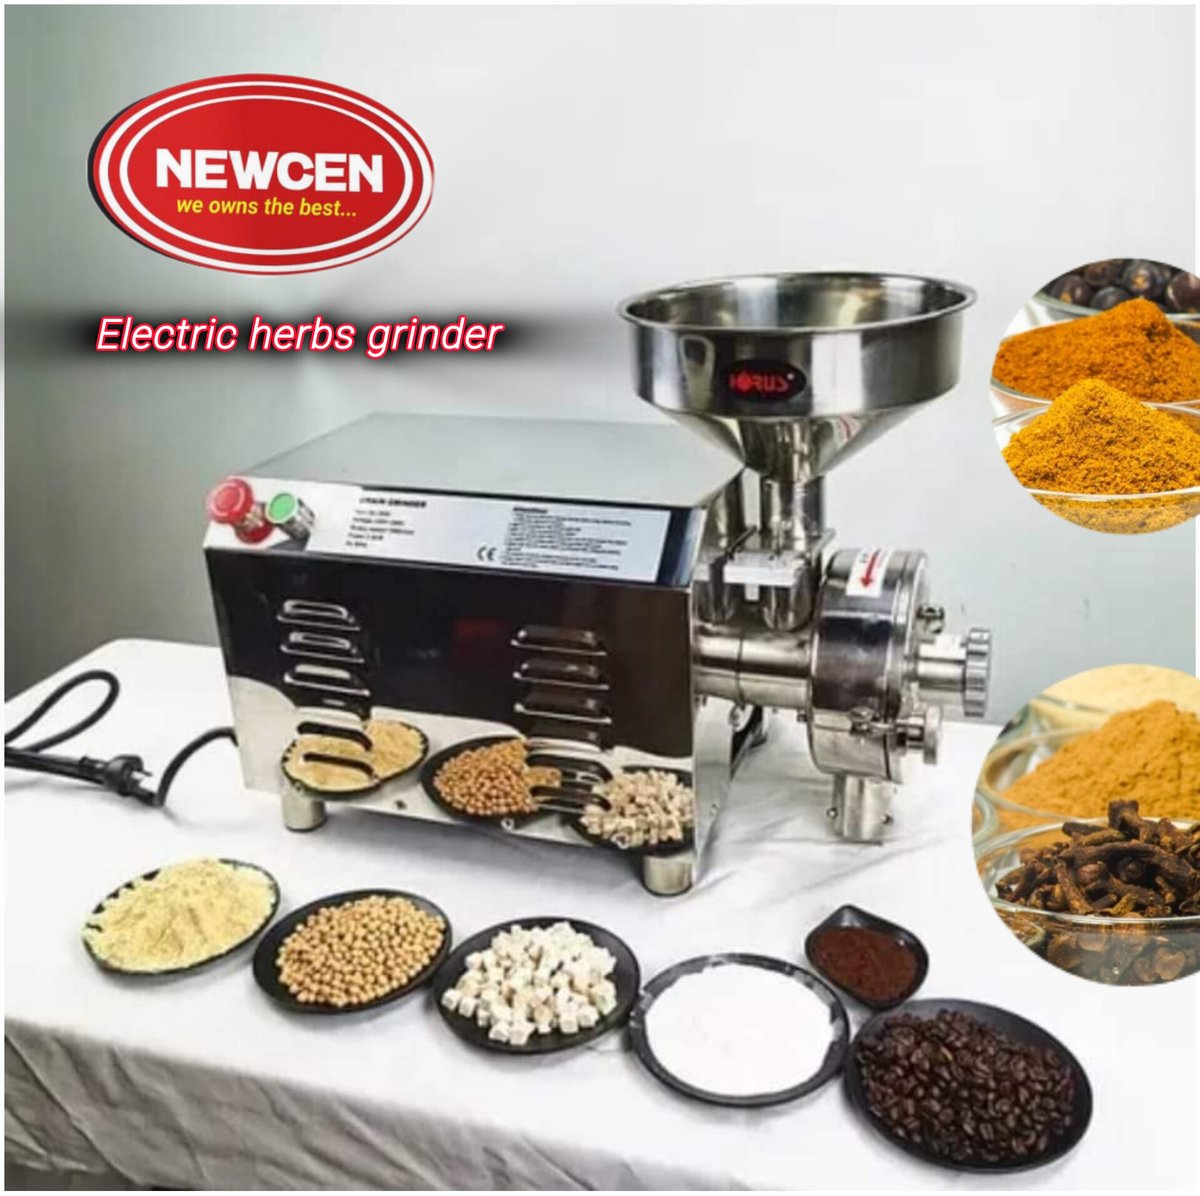 🌿 The NEWCEN Electric Herbs Grinding Machine is the perfect solution for busy kitchens that need to grind herbs quickly and efficiently. With a powerful motor and stainless steel blades, this machine can handle even the toughest herbs with ease. #we_owns_the_best #PiNetwork